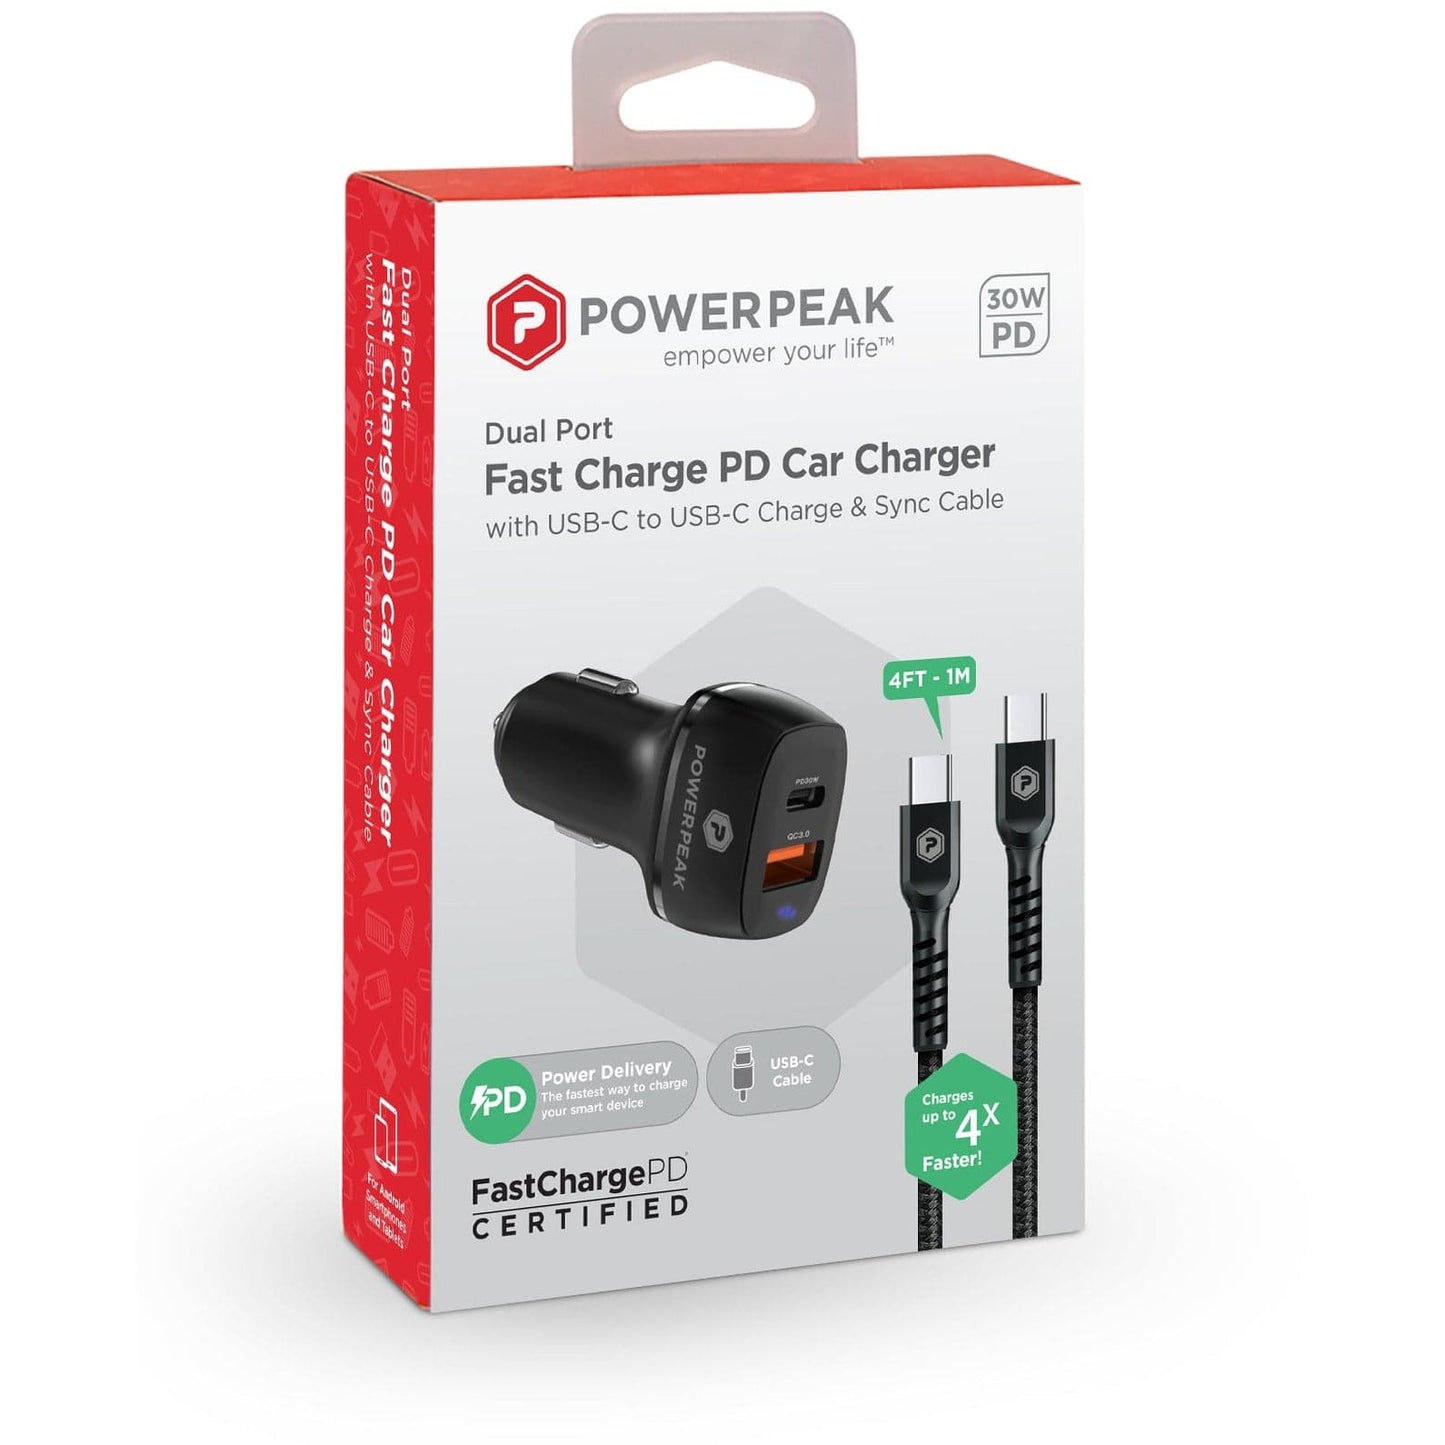 Powerpeak 30W USB & USB-C Dual Port  / USB-C to C Cable Fast Charge Car Charger Kit - Black